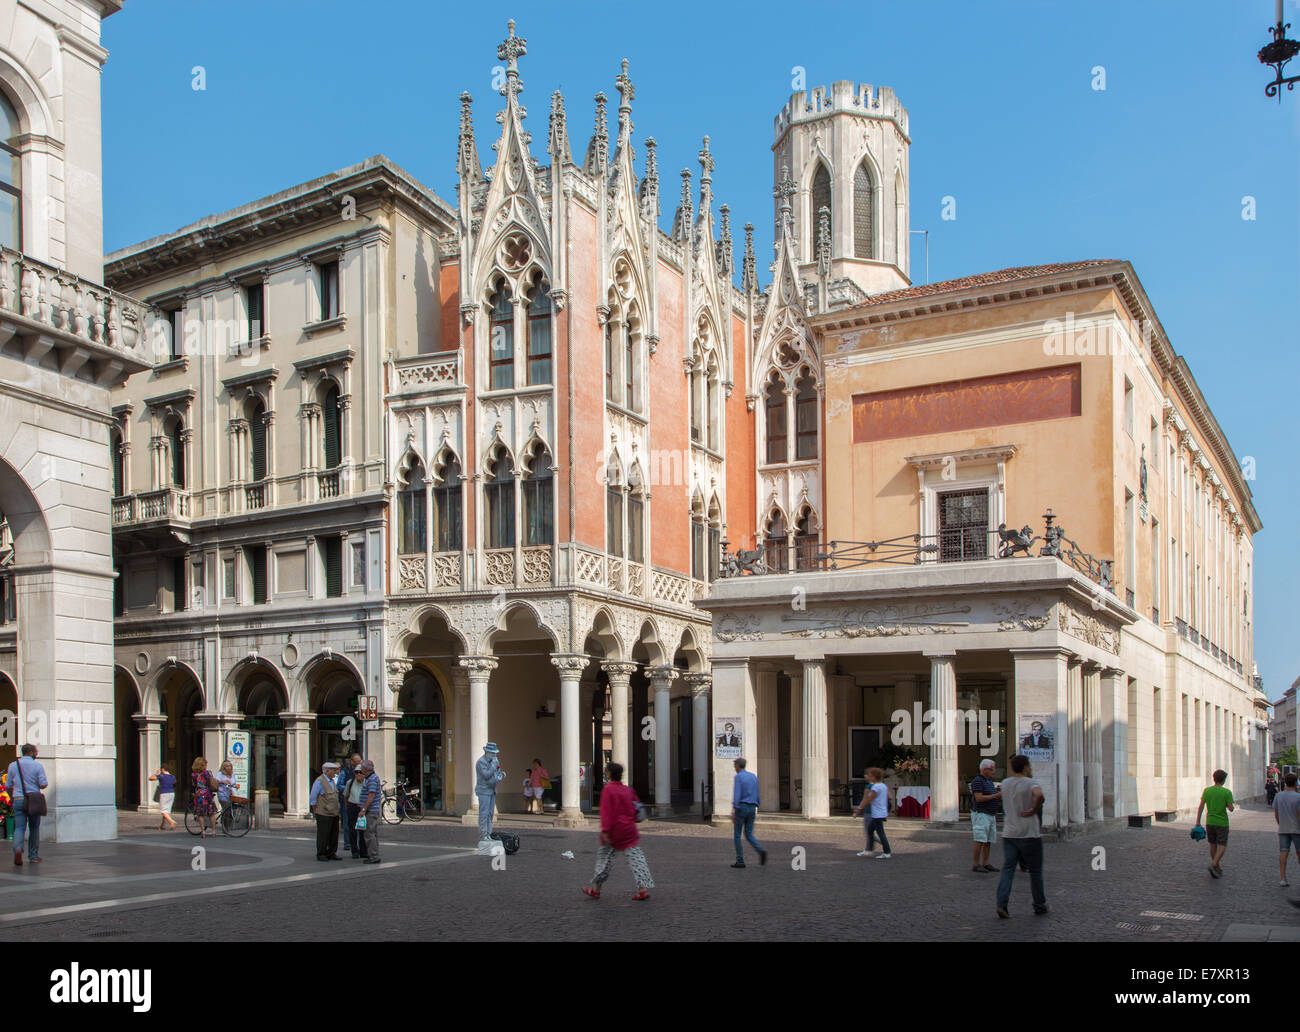 PADUA, ITALY - SEPTEMBER 8, 2014: The Caffe Pedrocchi from south. Stock Photo